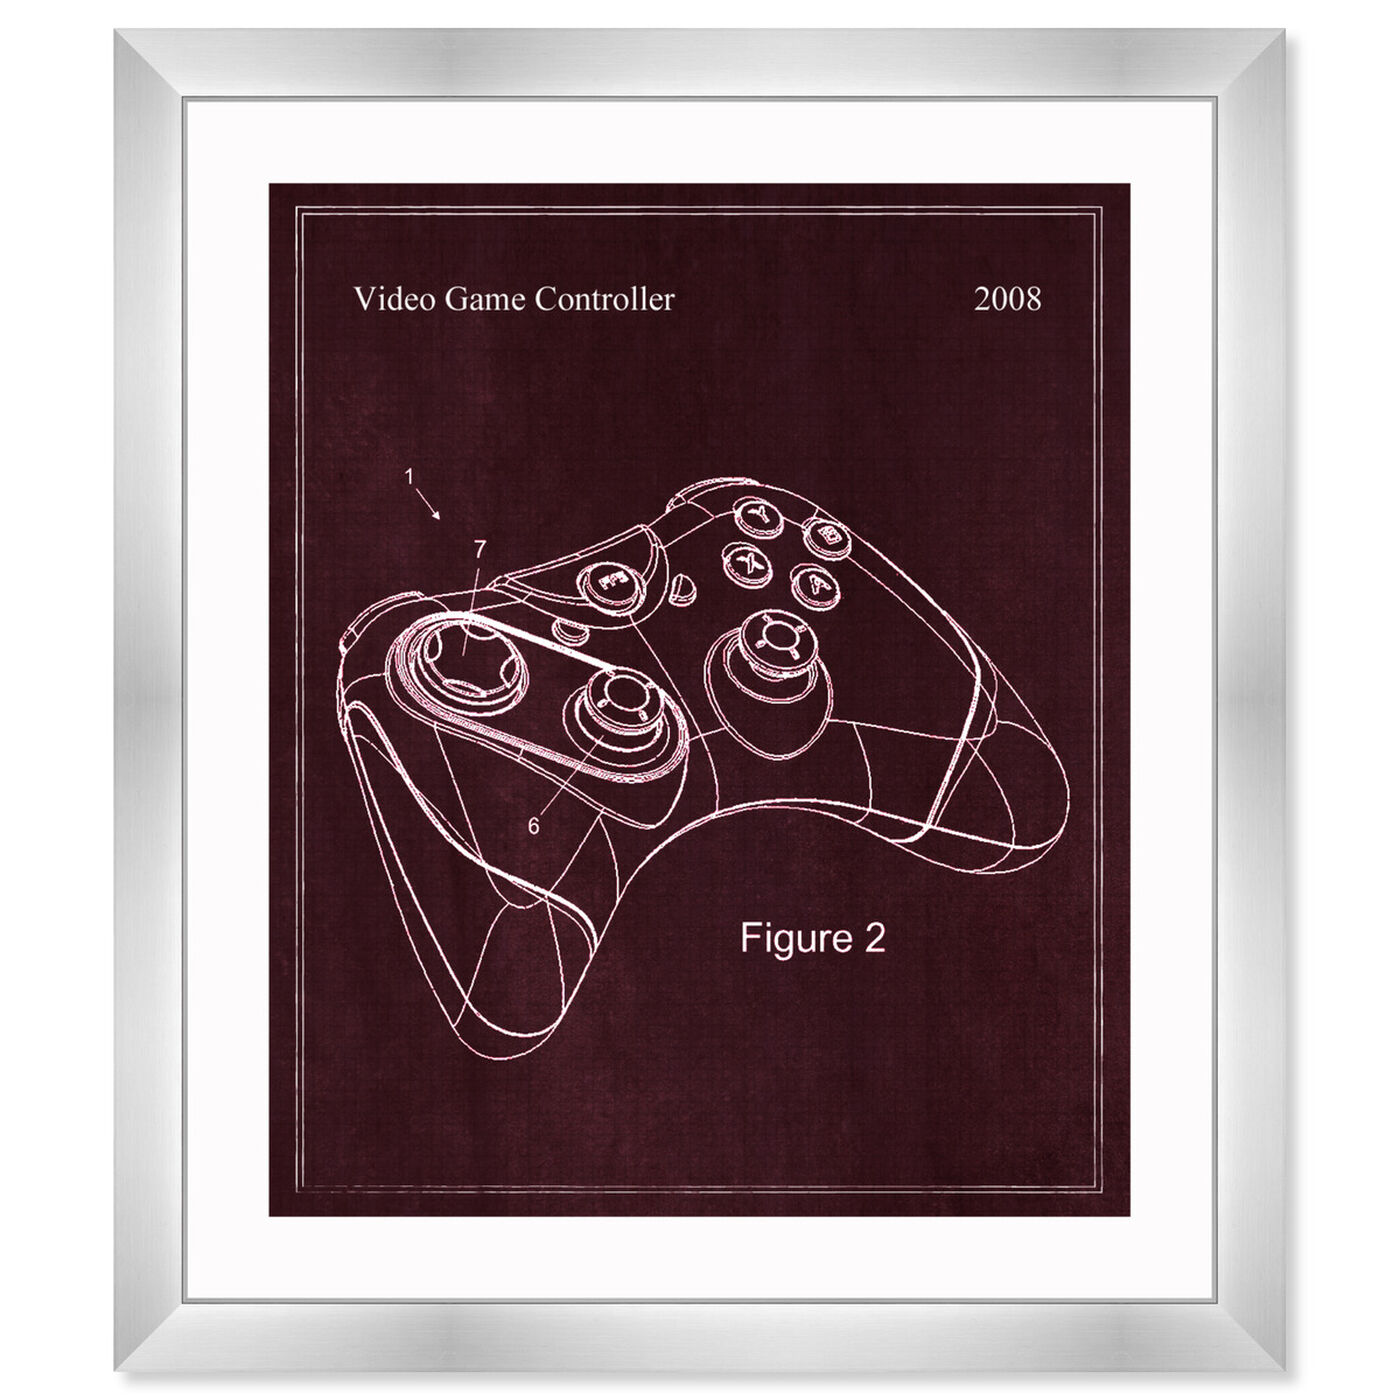 Front view of Video Game Controller, 2008 featuring entertainment and hobbies and video games art.